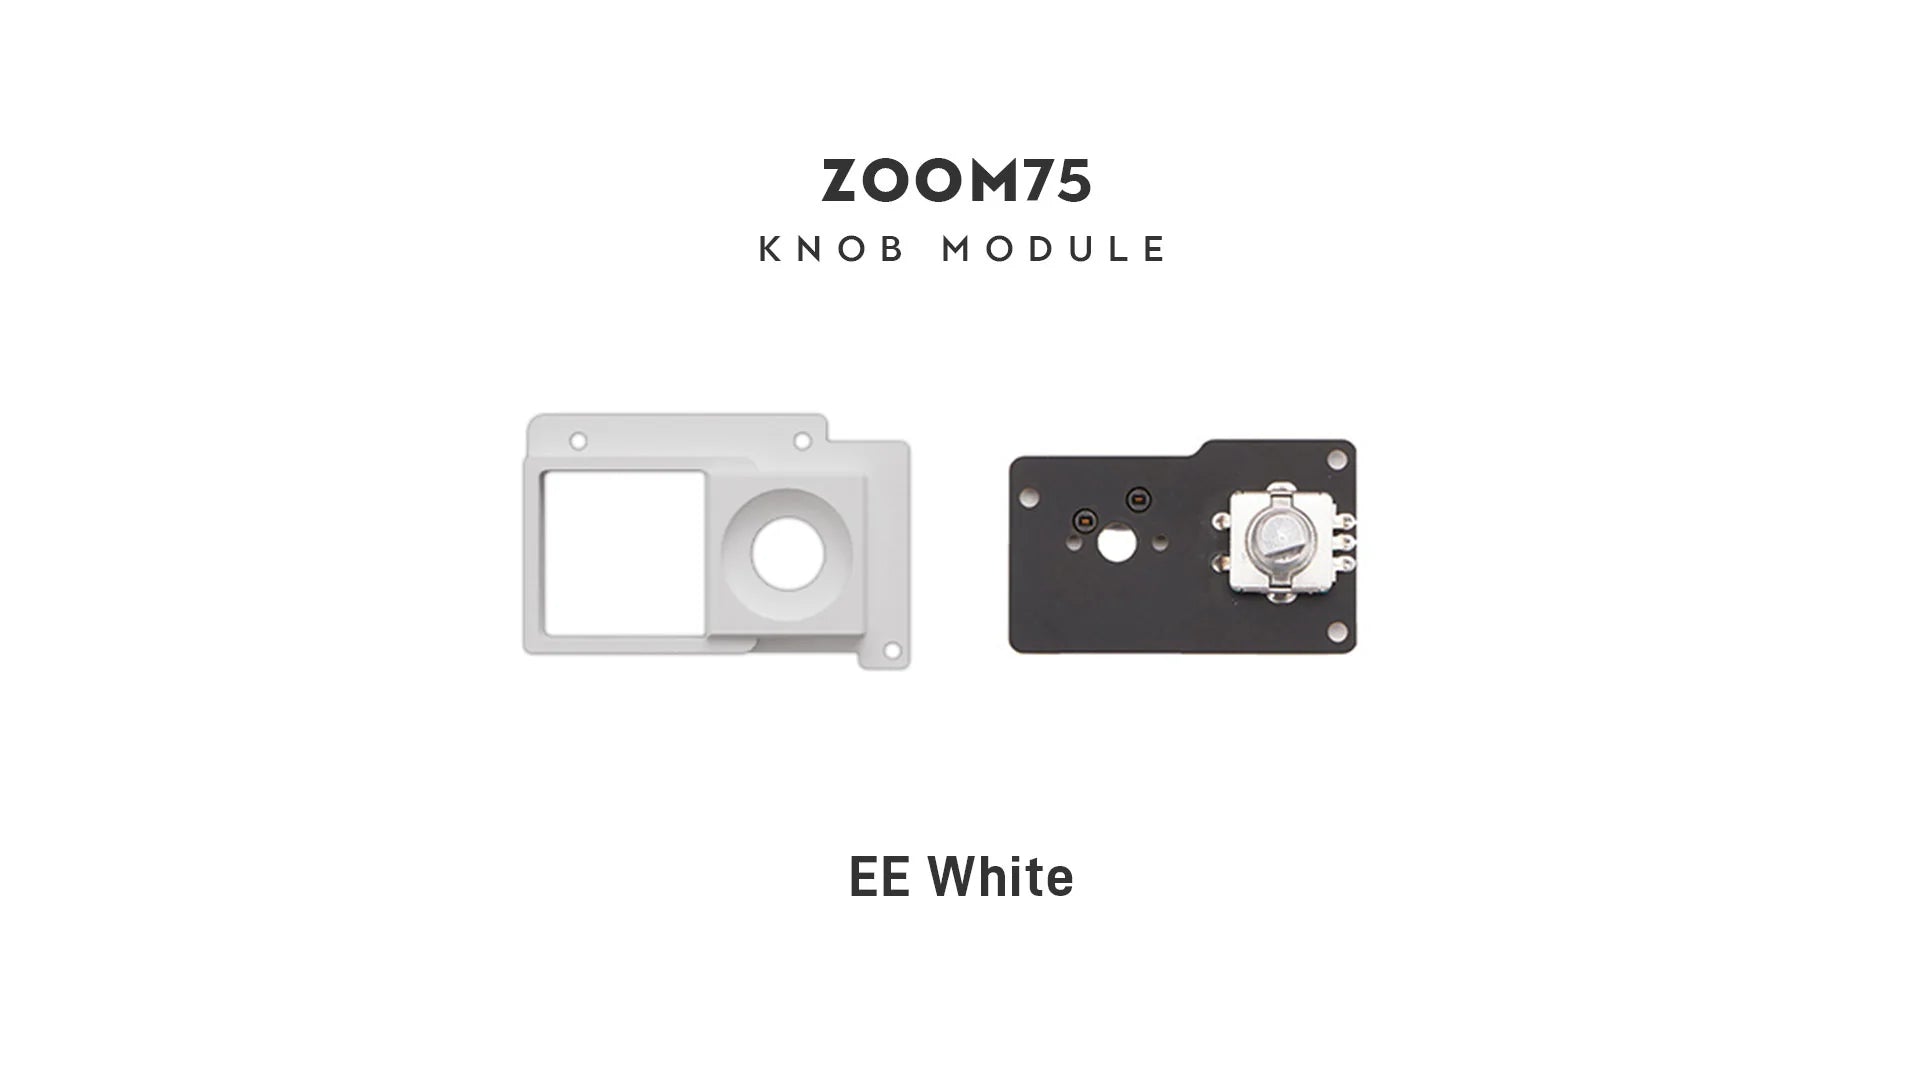 Zoom75 Modules [Preorder]